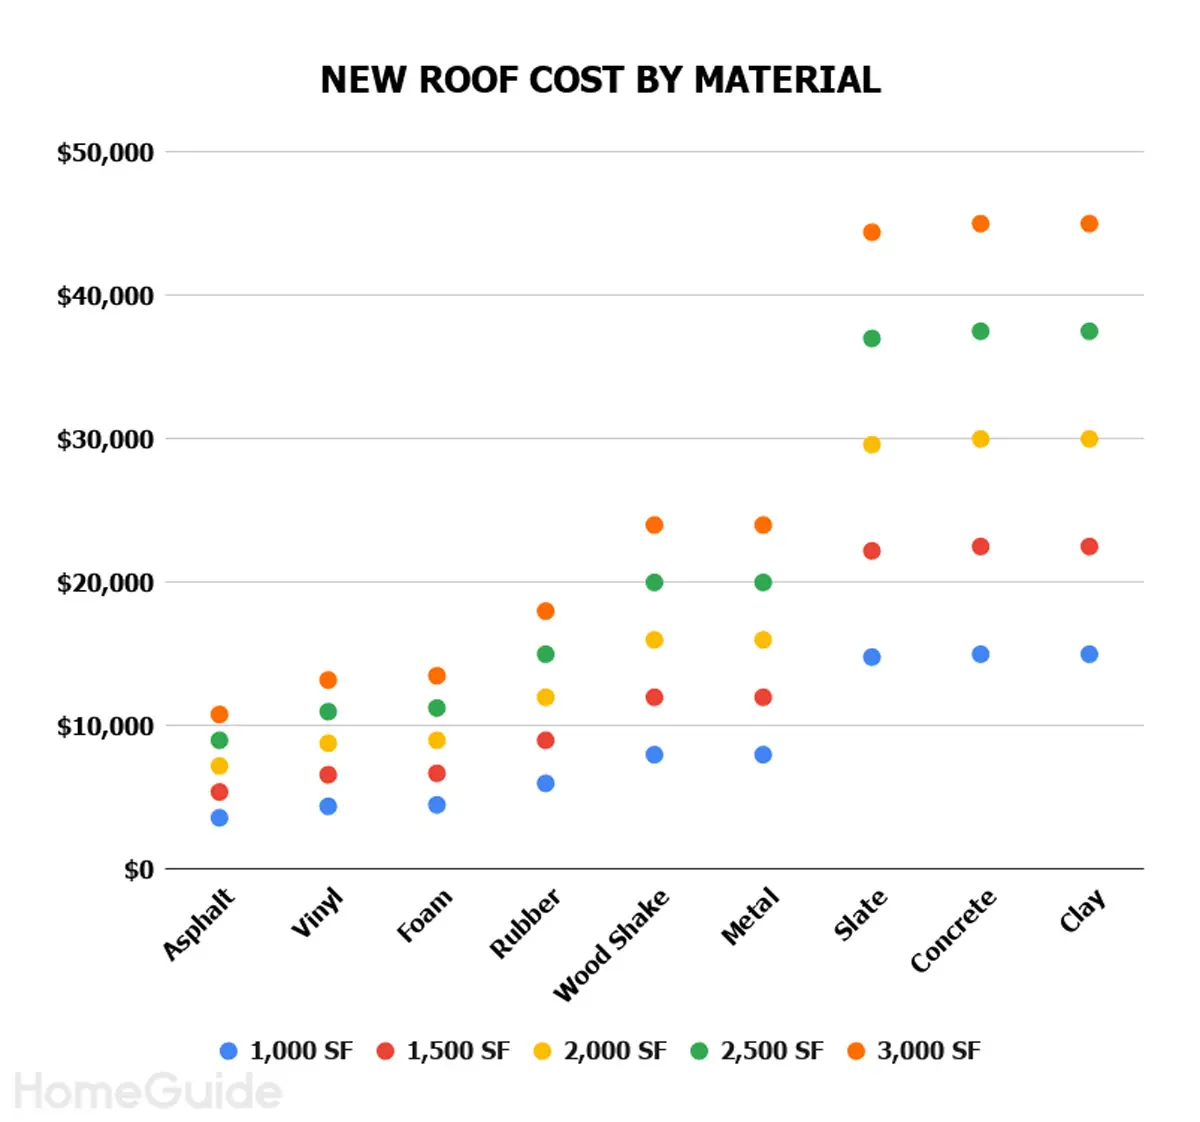 Getting Roof Estimates and Working With Roofing Contractors